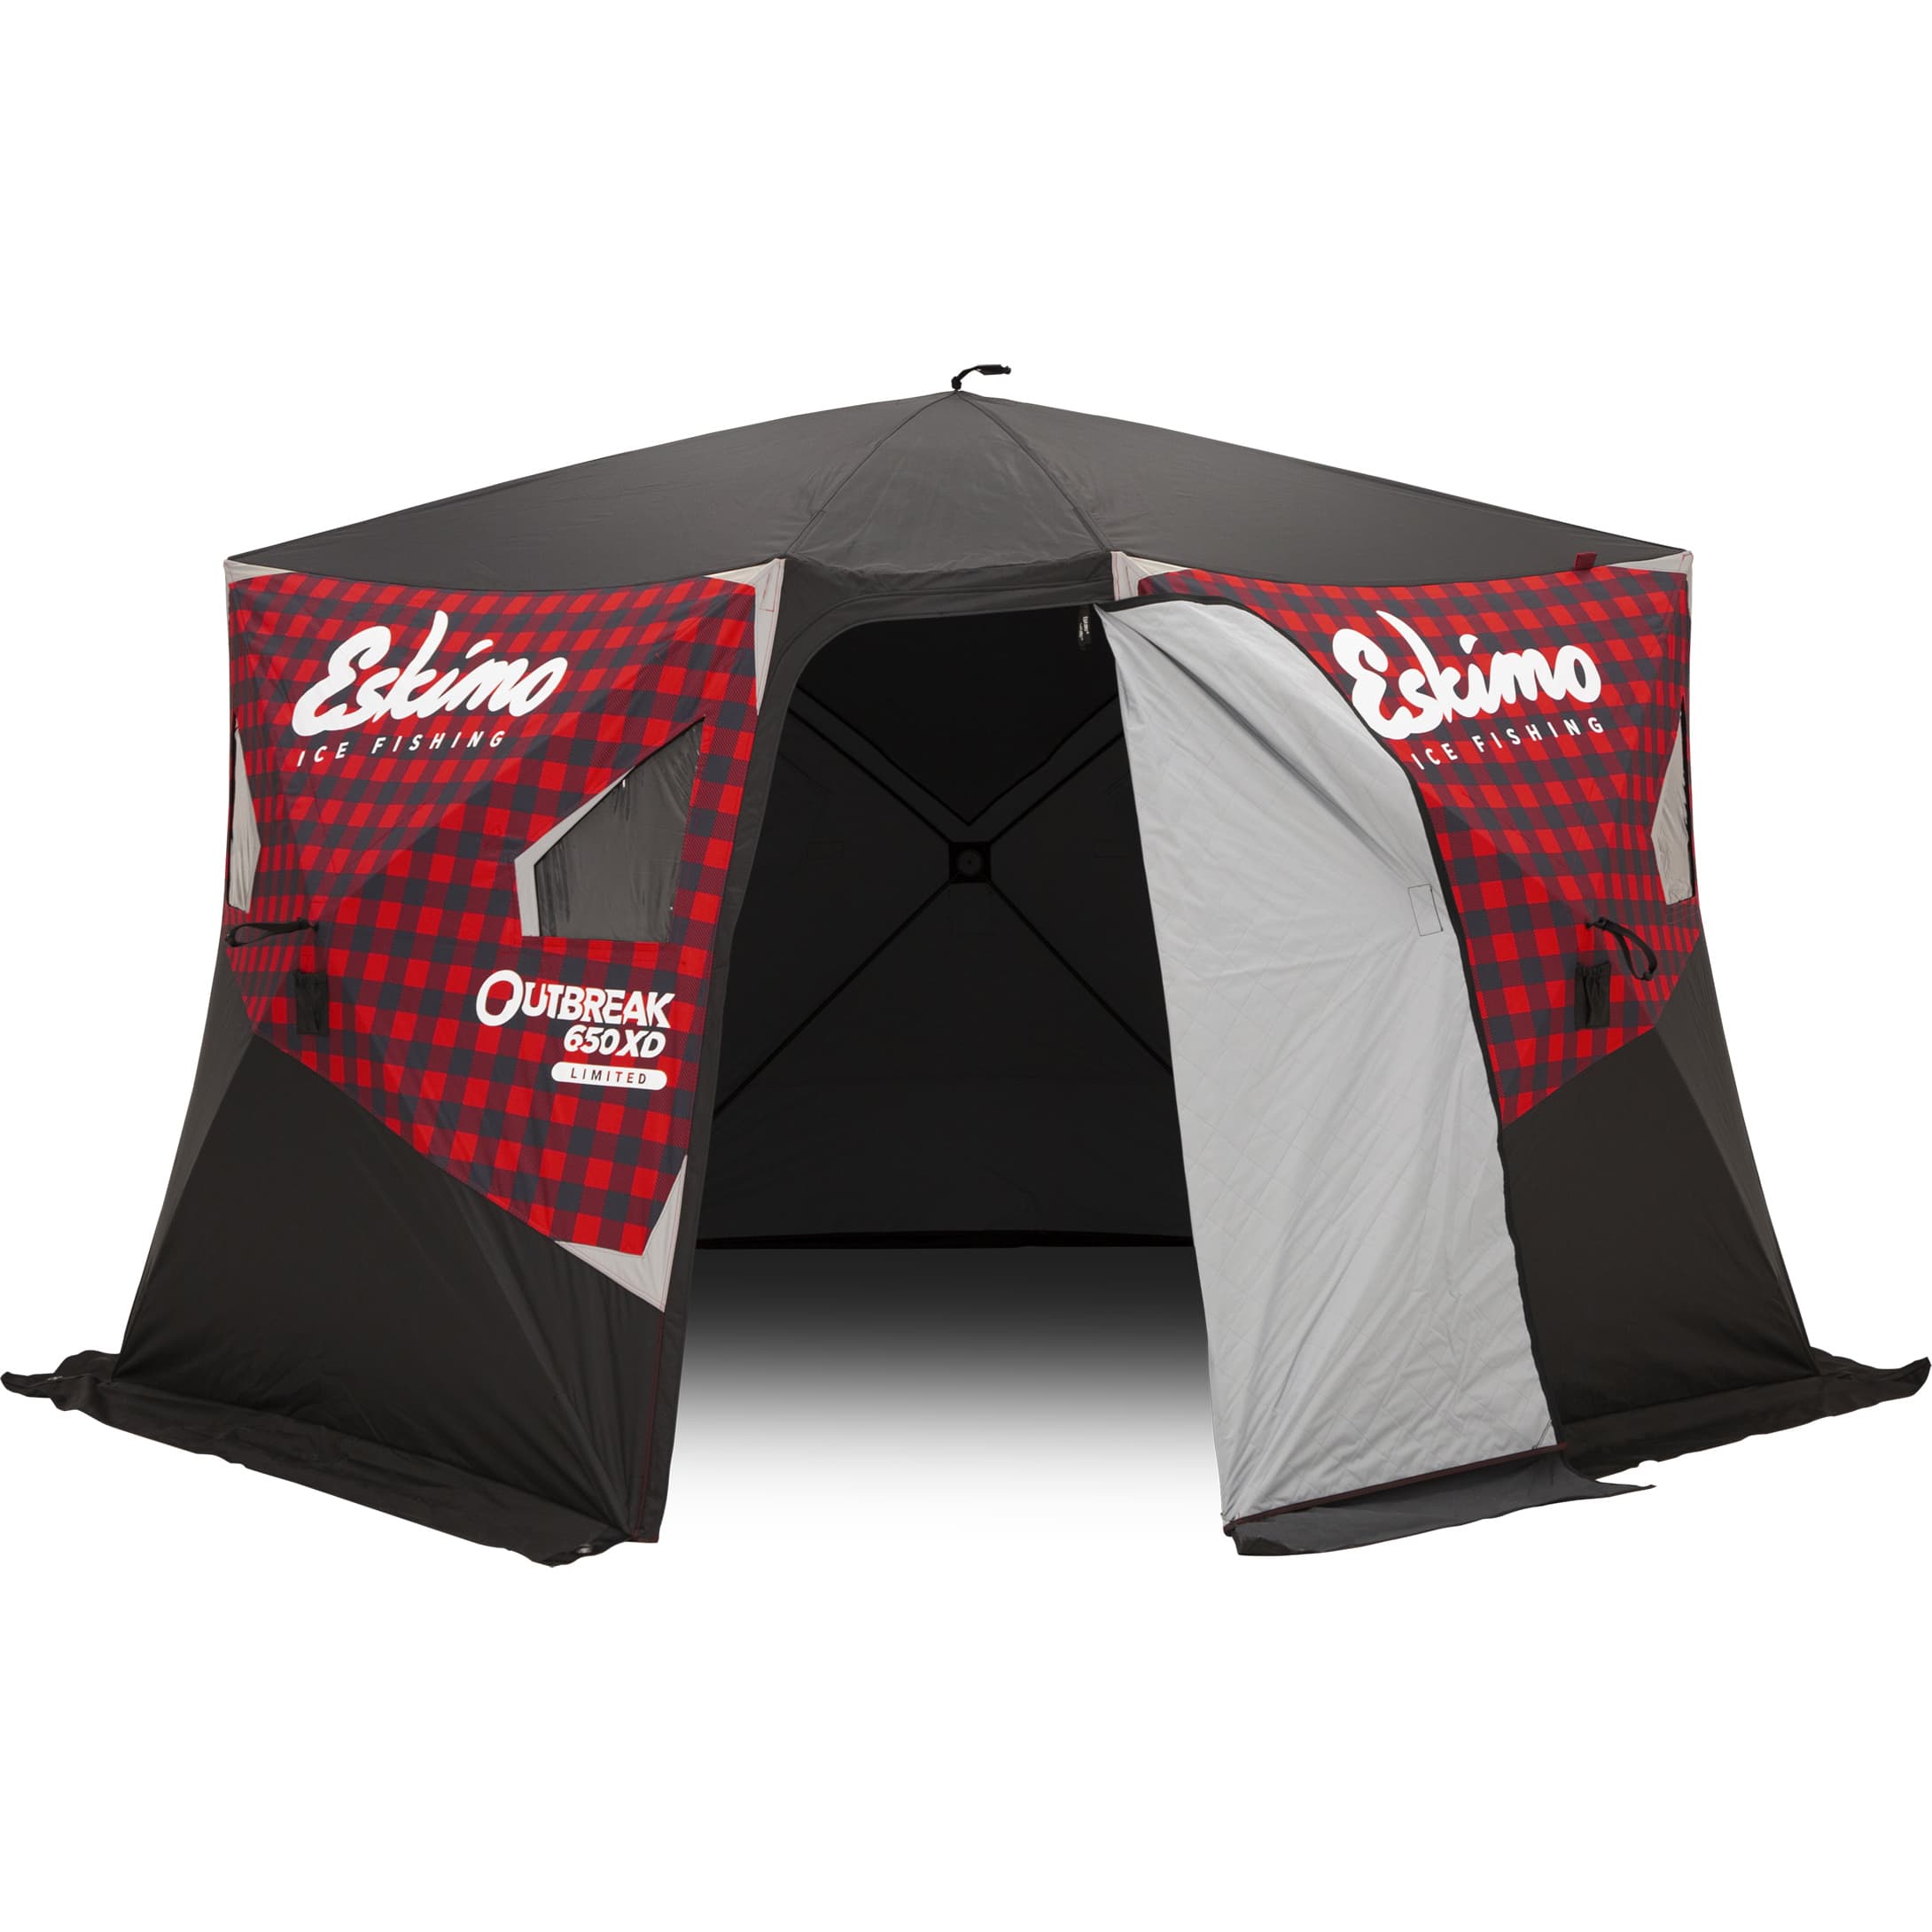 Ice Fishing Shelters for sale in Camp Borden, Ontario